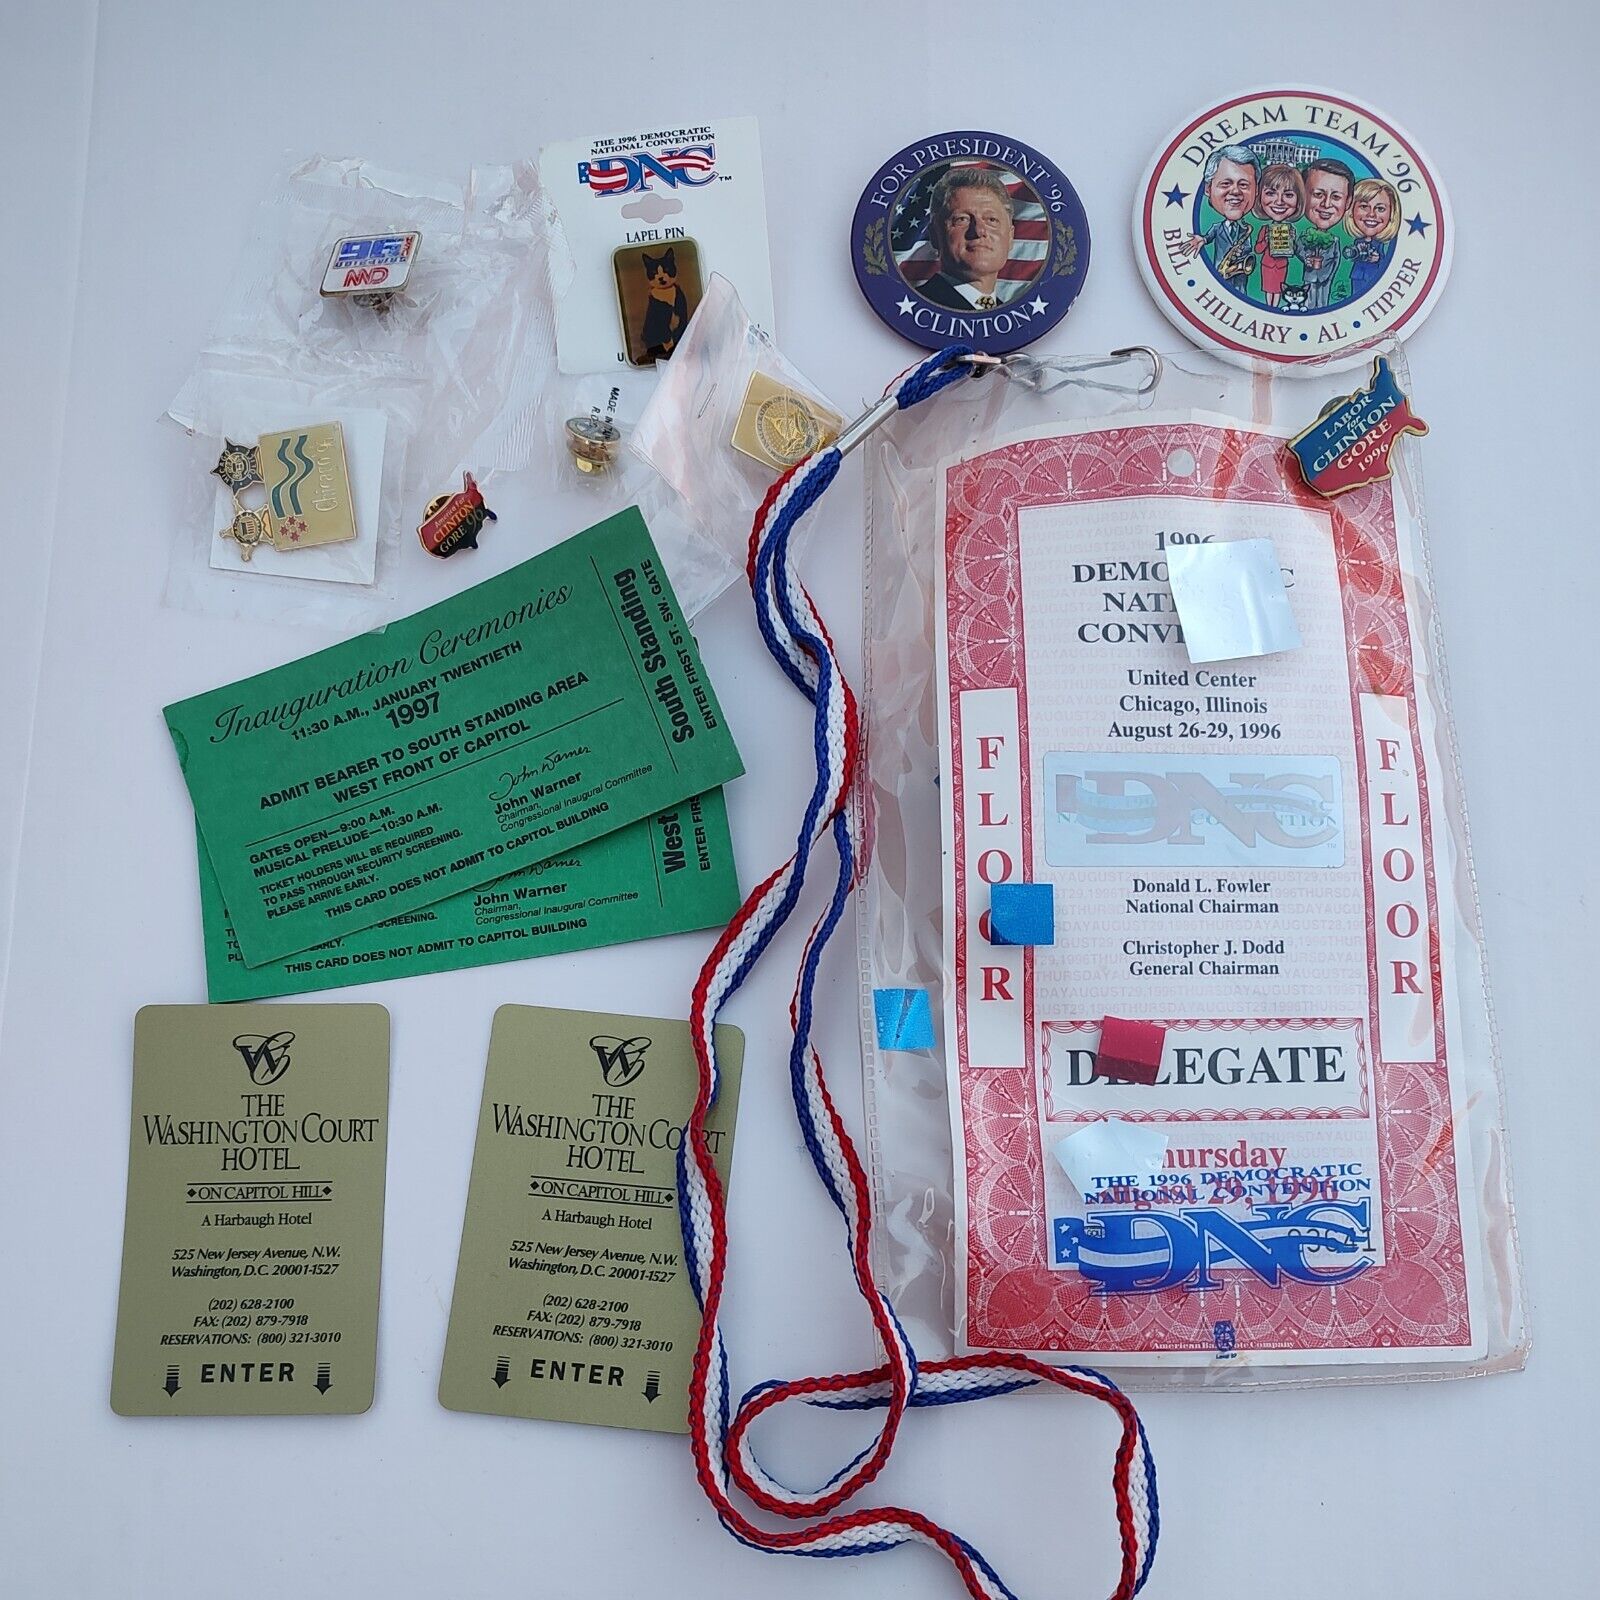 1996 Democratic National Convention Delegate Pass and Pins Clinton Gore